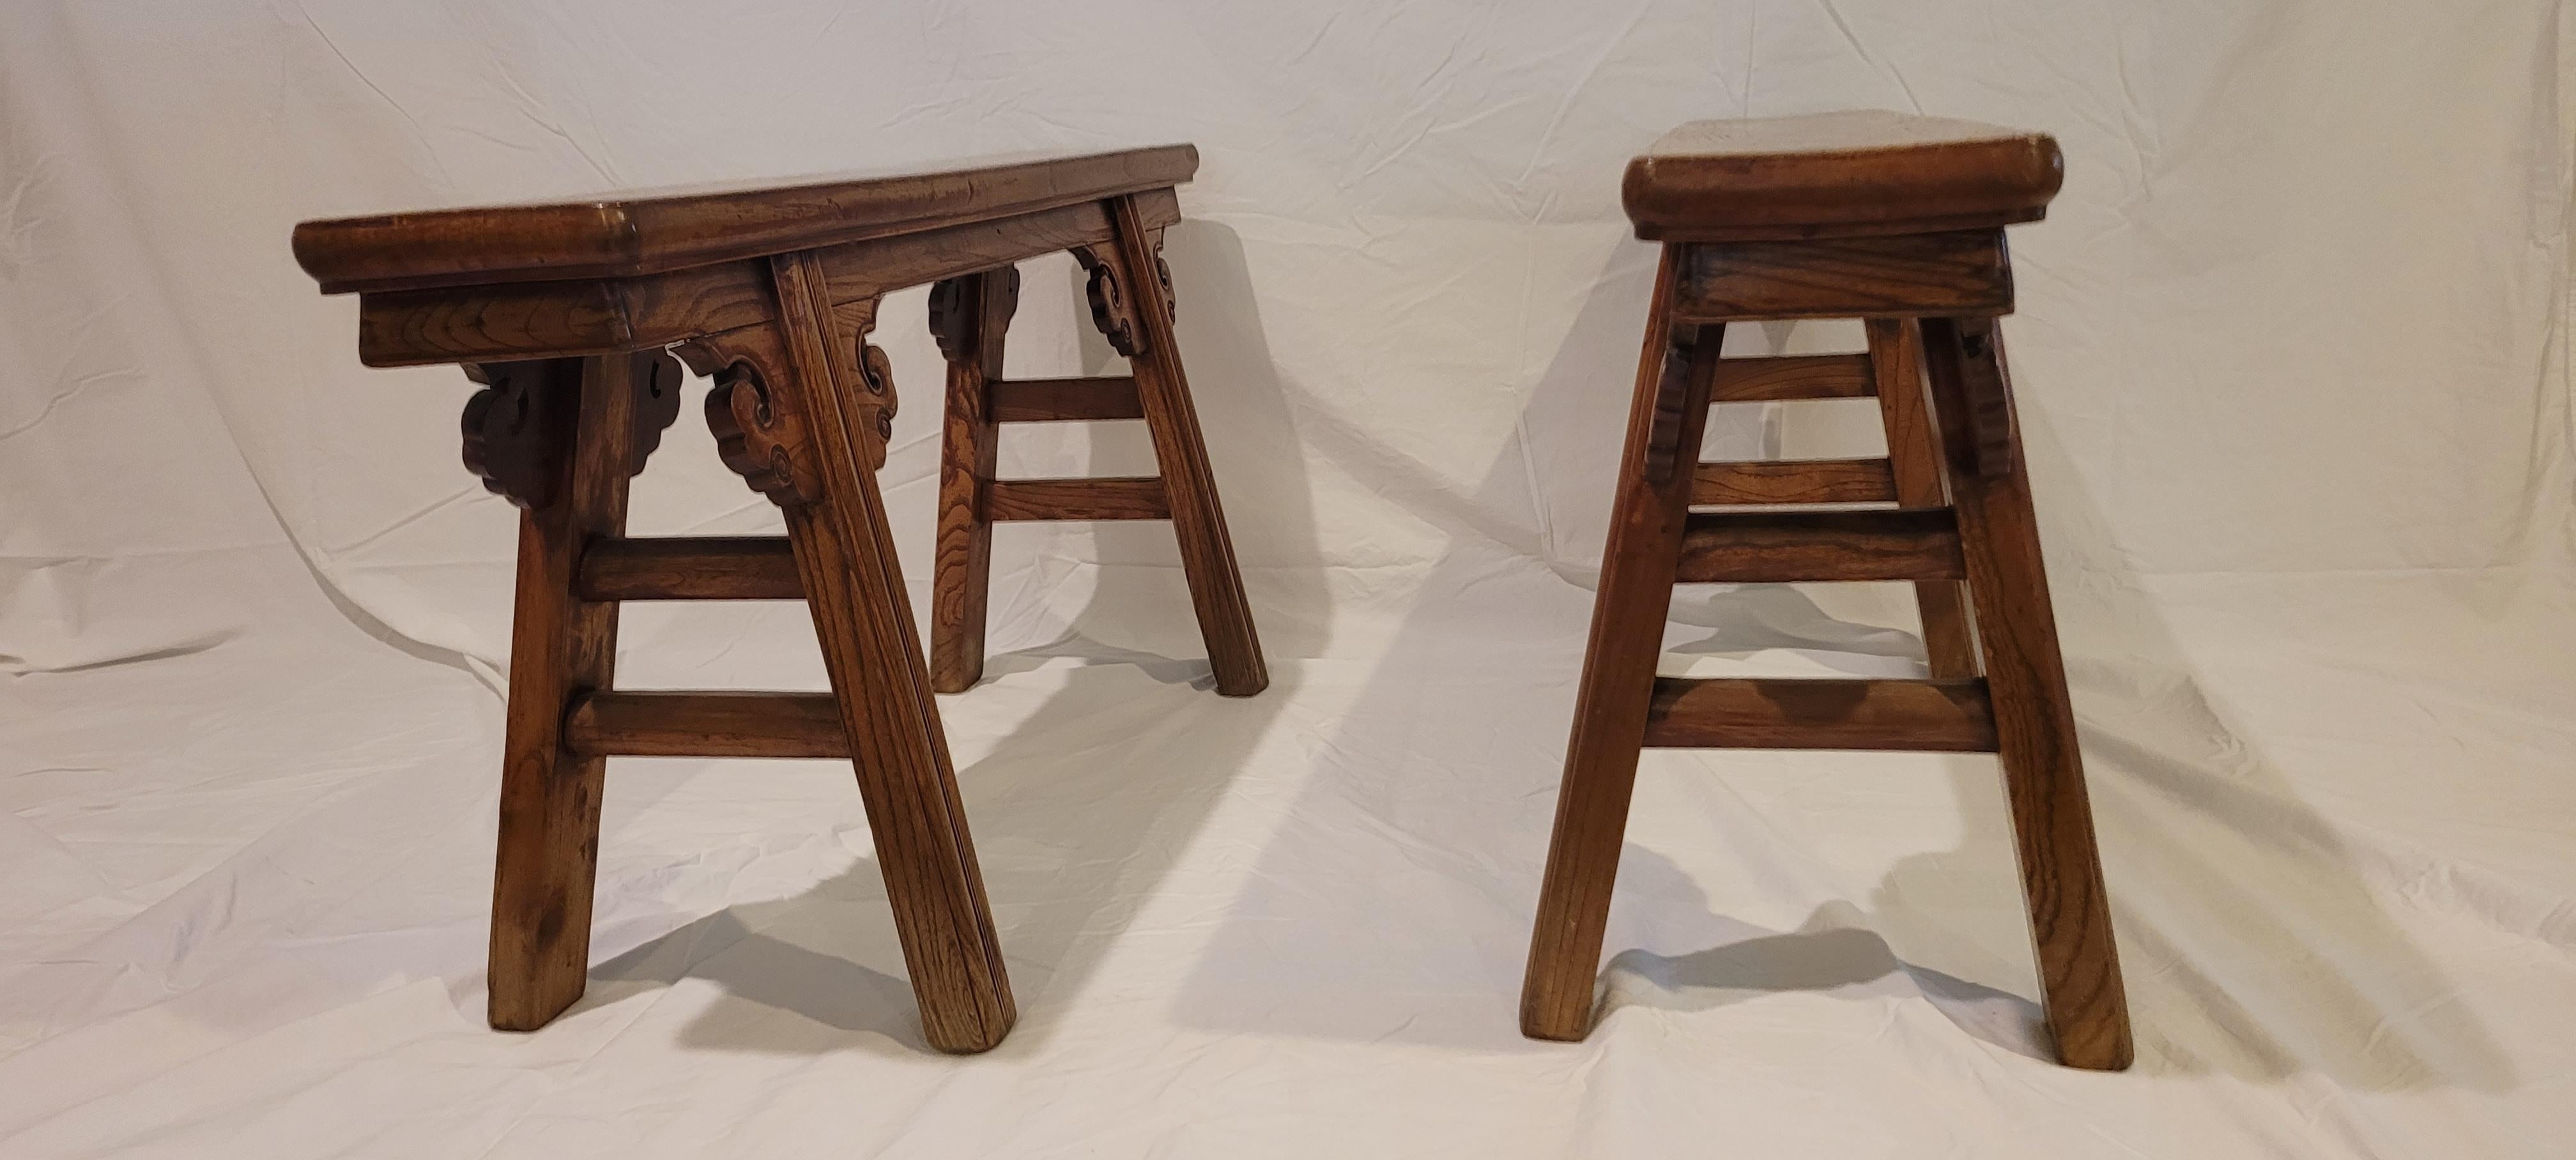 19th Century Pair of Spring Benches In Good Condition For Sale In Santa Monica, CA